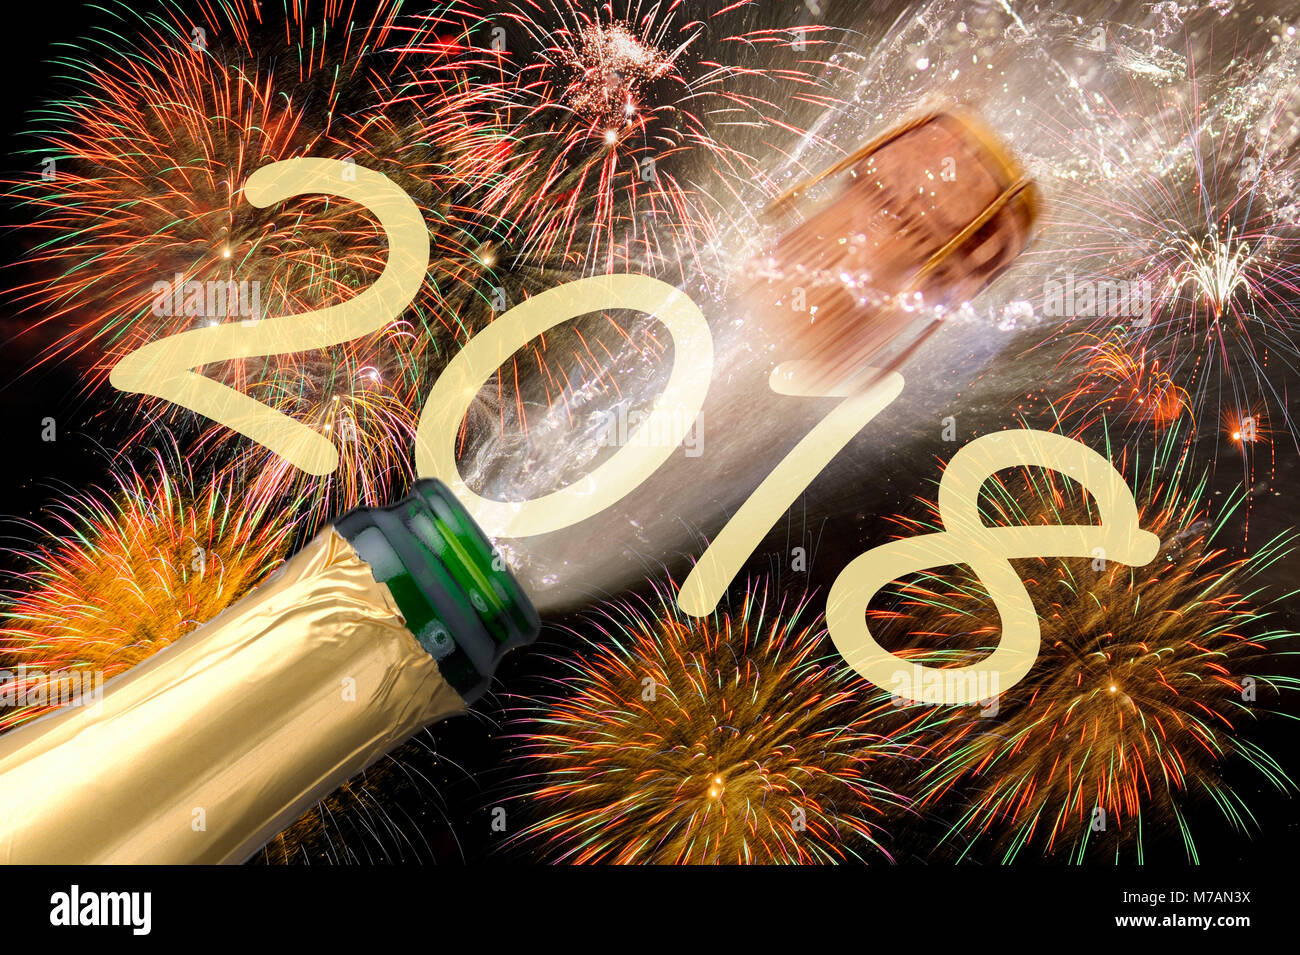 Popping champagne bottle with flying cork and brilliant fireworks at New Year's Eve in 2018 Stock Photo